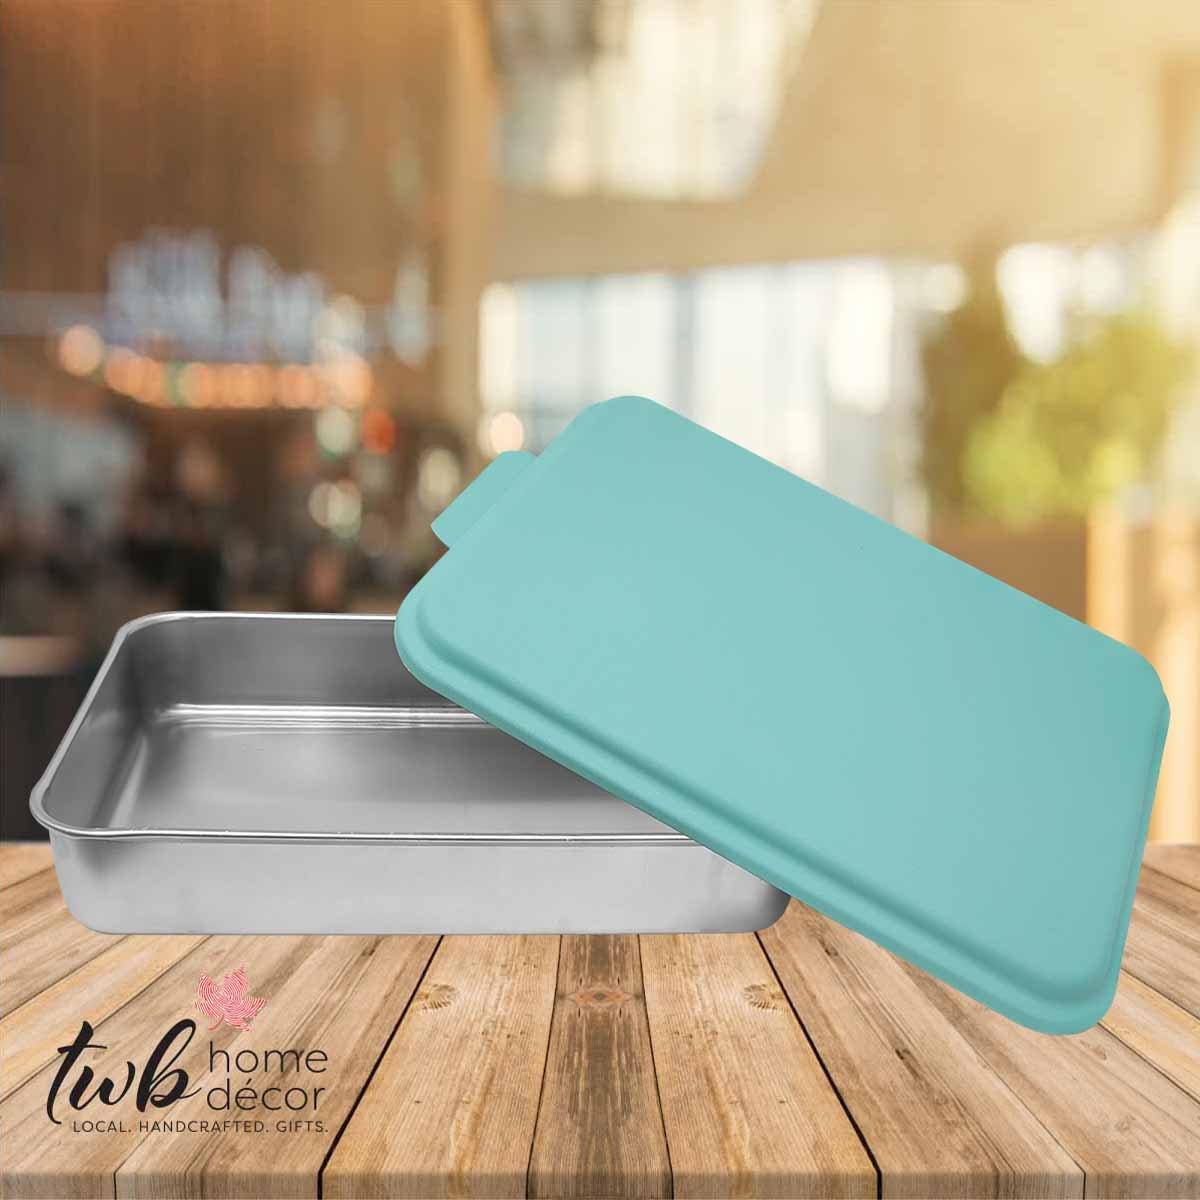 Made with Love in ... Kitchen Cake Pan with lid - CUSTOM - TWB Home Decor